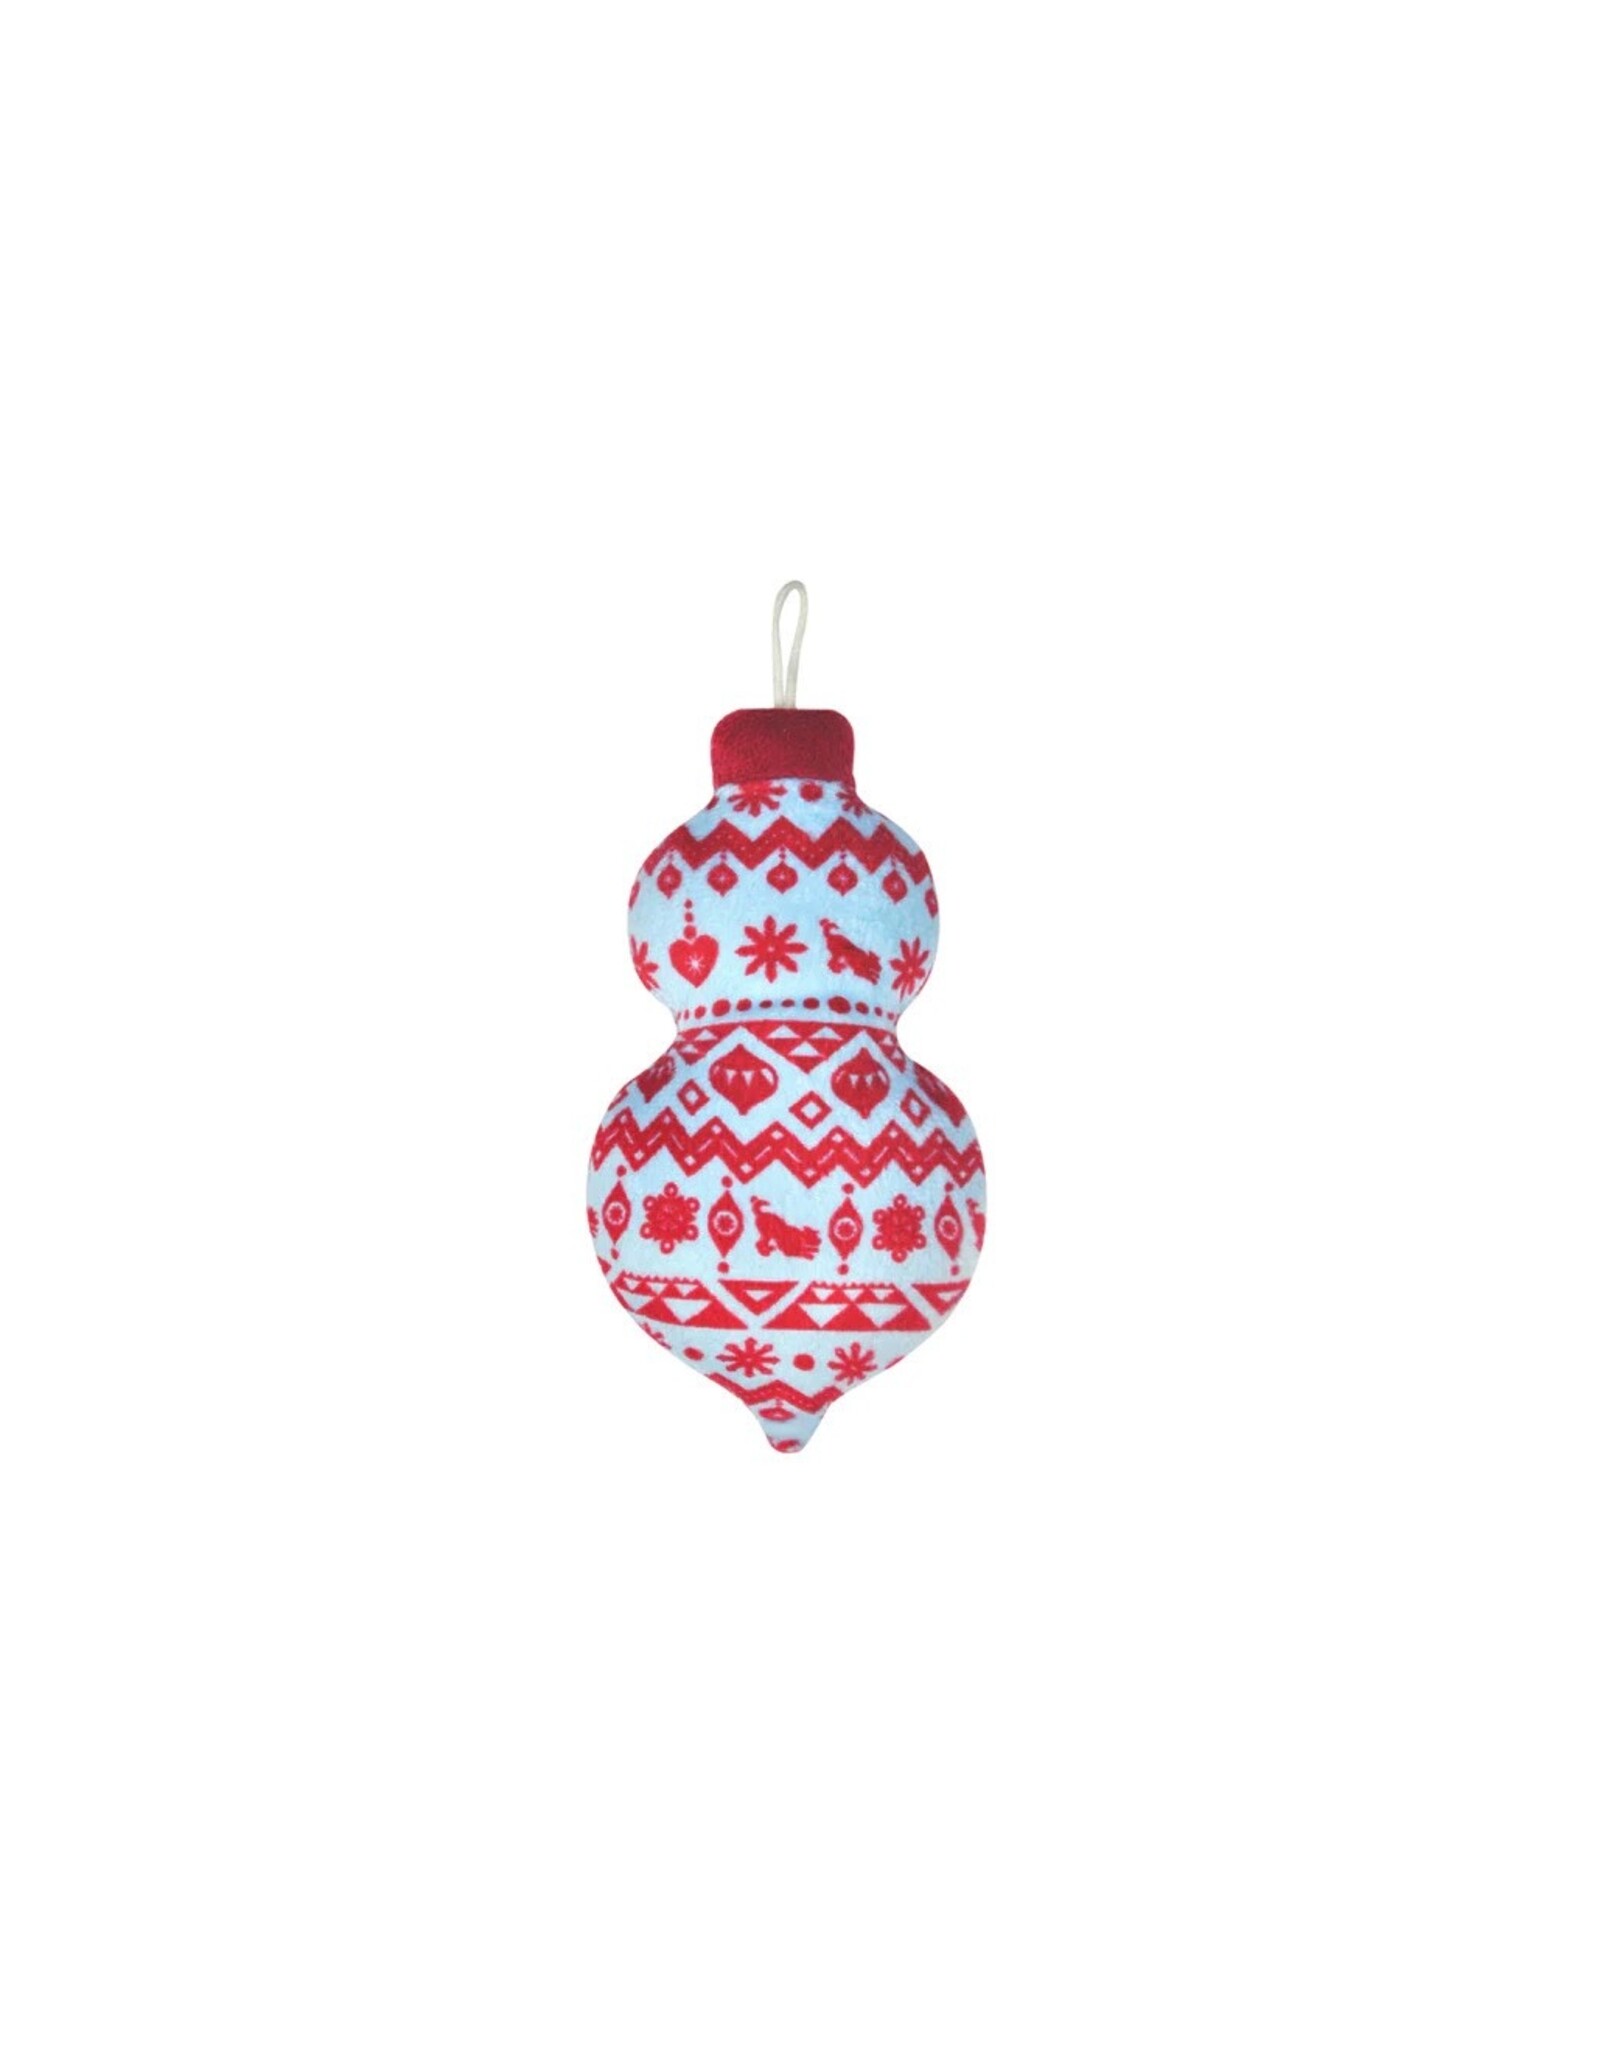 PLAY PLAY CANDY WRAP ORNAMENT BLUE SM